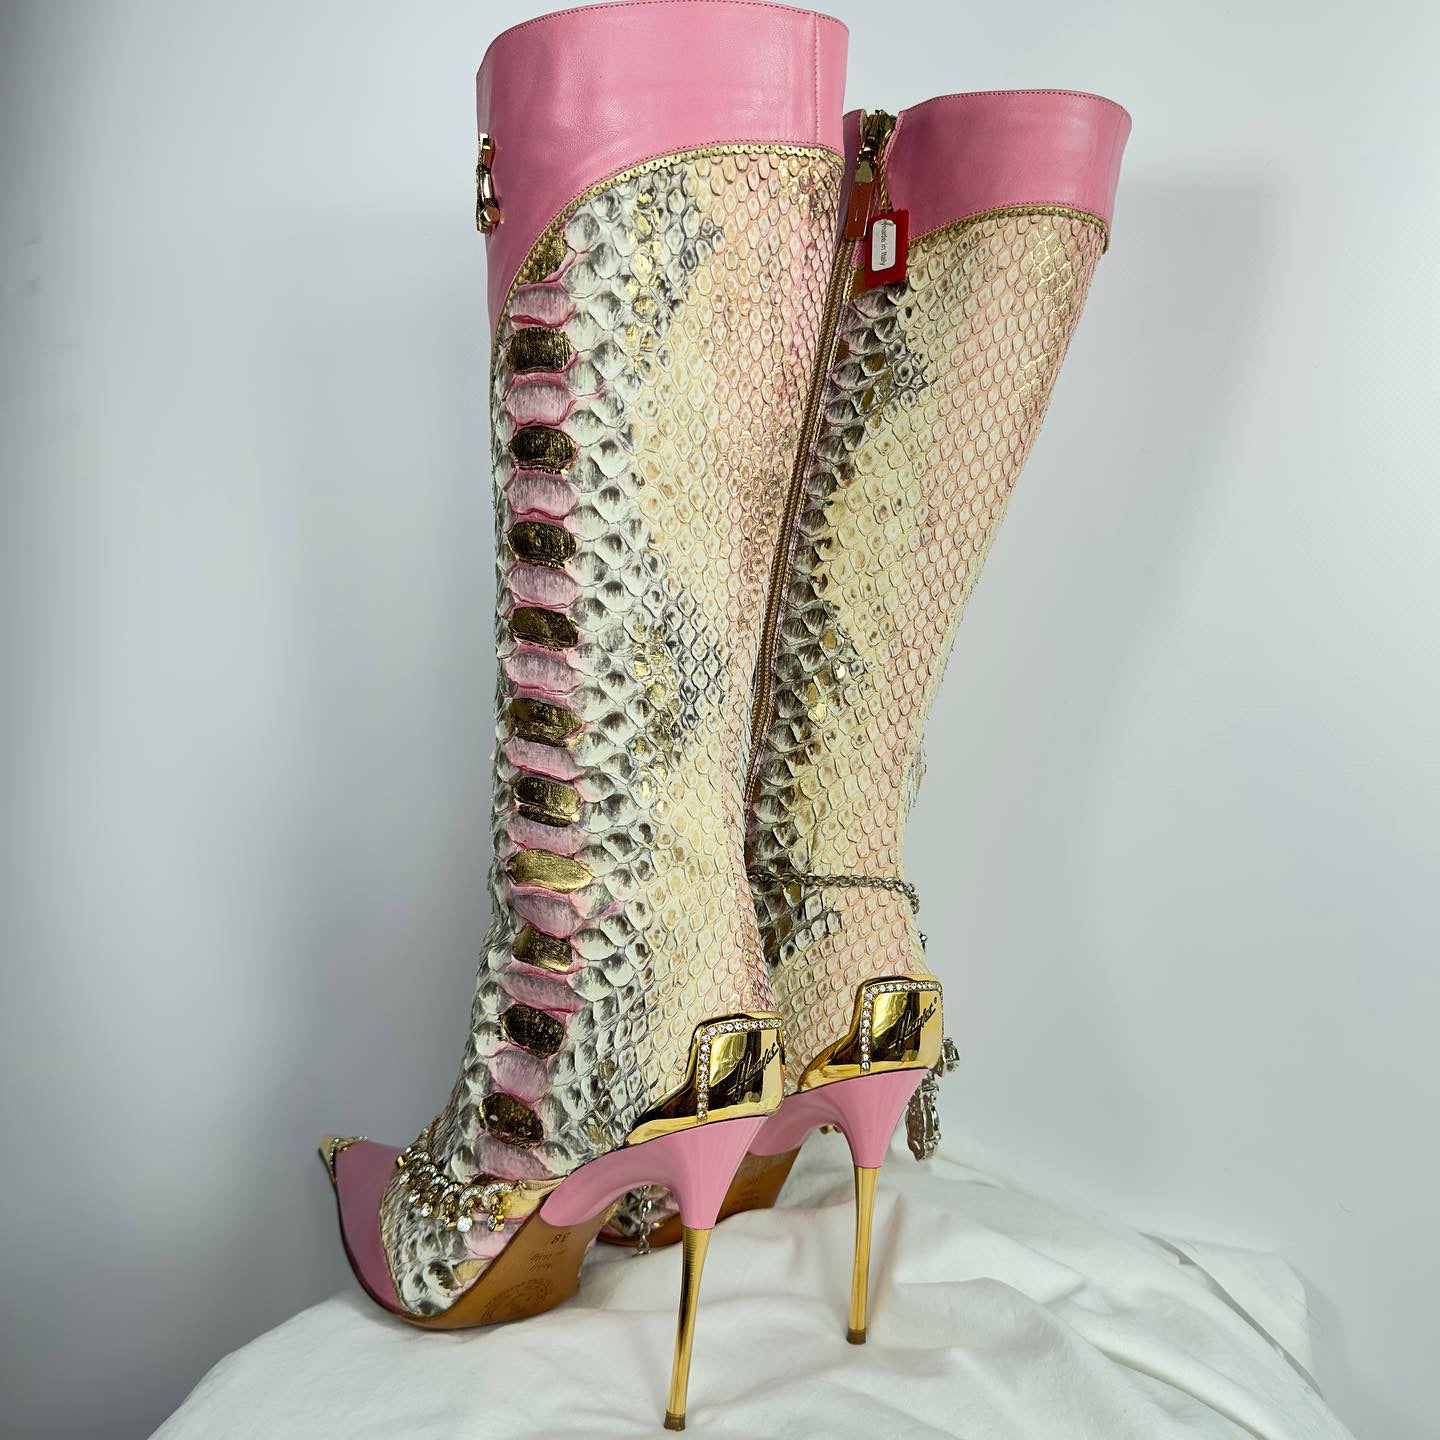 Hamlet Couture Italian Python Boots new with box